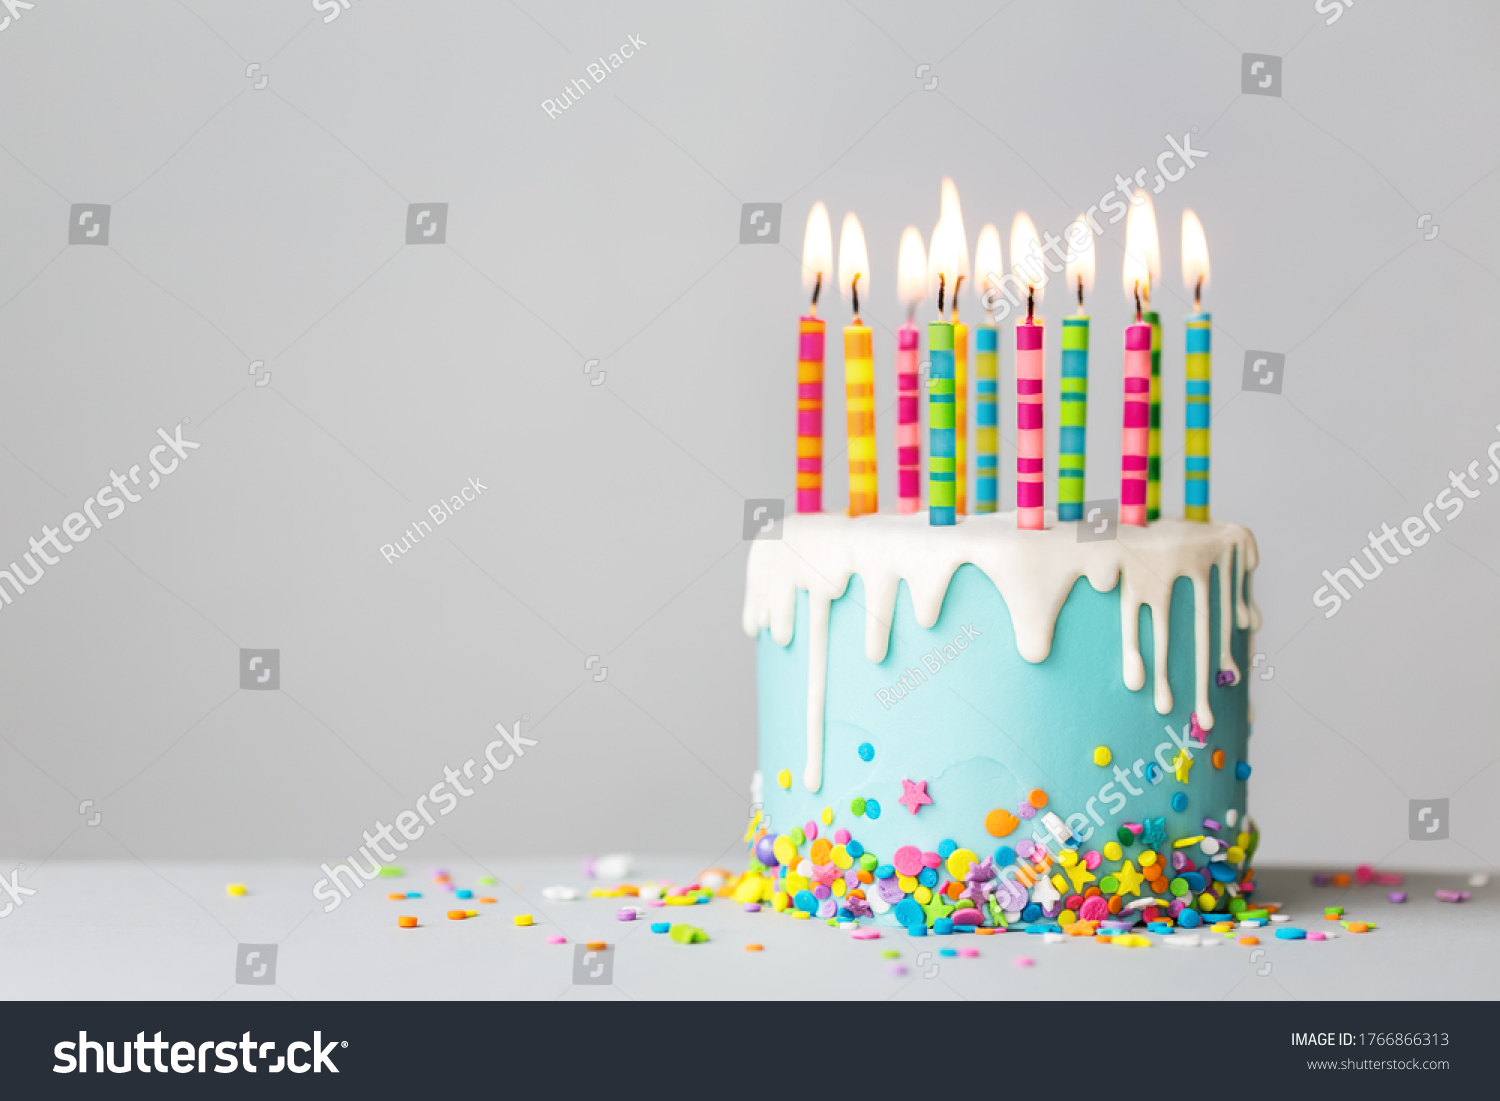 Birthday cake with white drip icing, sprinkles and colorful birthday candles #1766866313